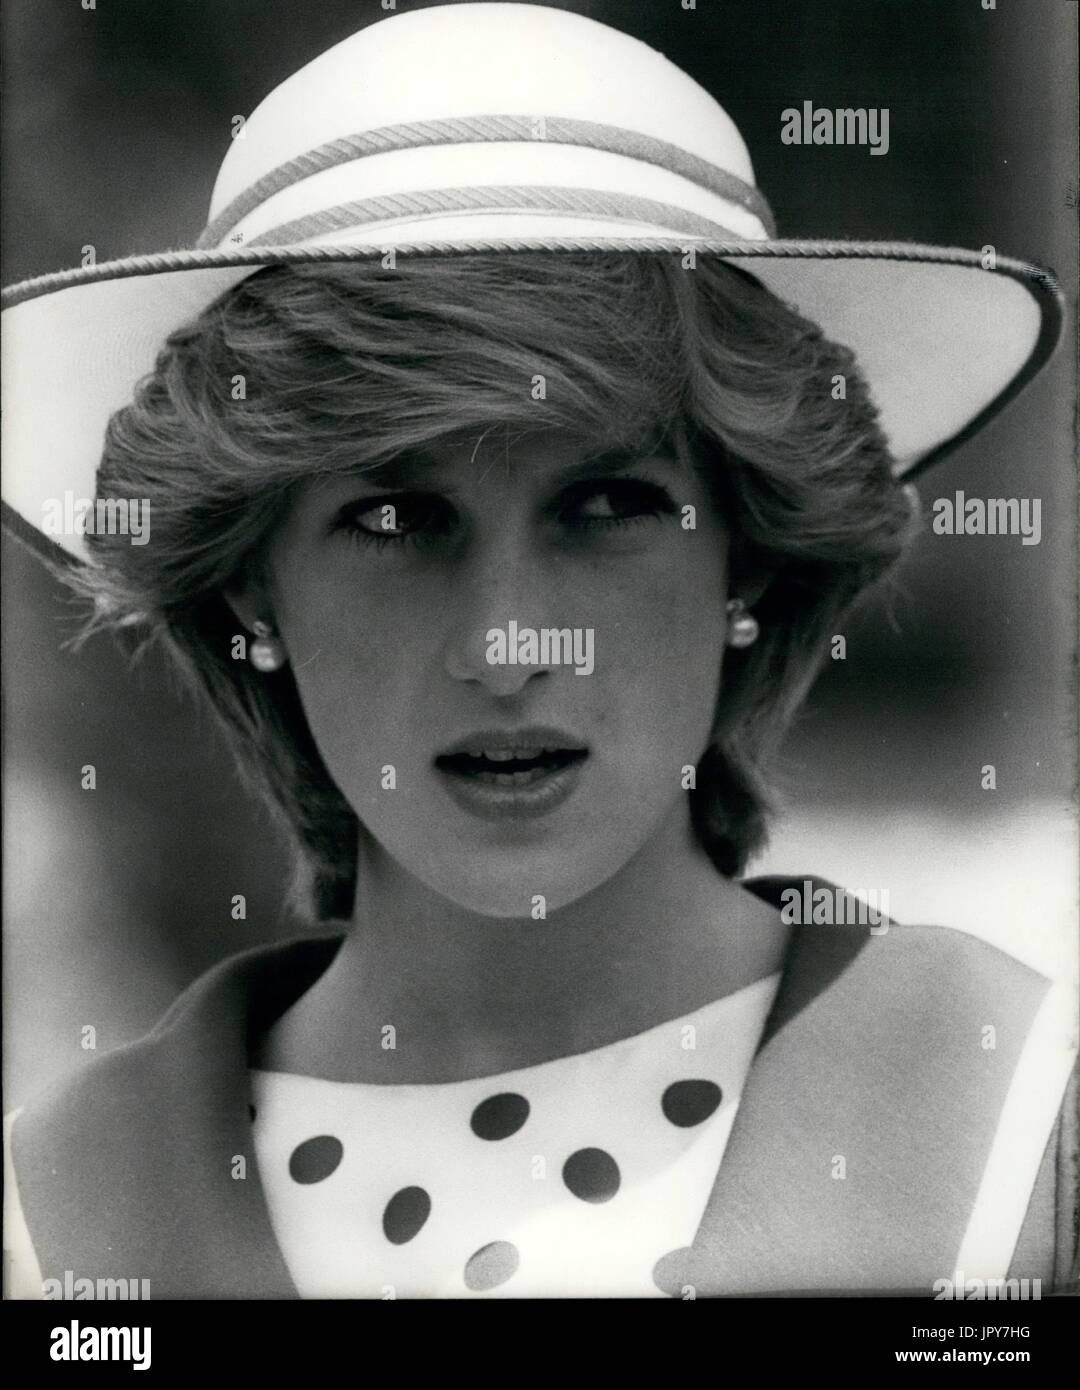 August 31, 2017 marks 20 years since Princess Diana's death. Diana Princess of Wales died from serious injuries in the early hours of August 31st 1997 after a car crash in Paris. Pictured: 1982 - Princess Diana Credit: Keystone Pictures USA/ZUMAPRESS.com/Alamy Live News Stock Photo